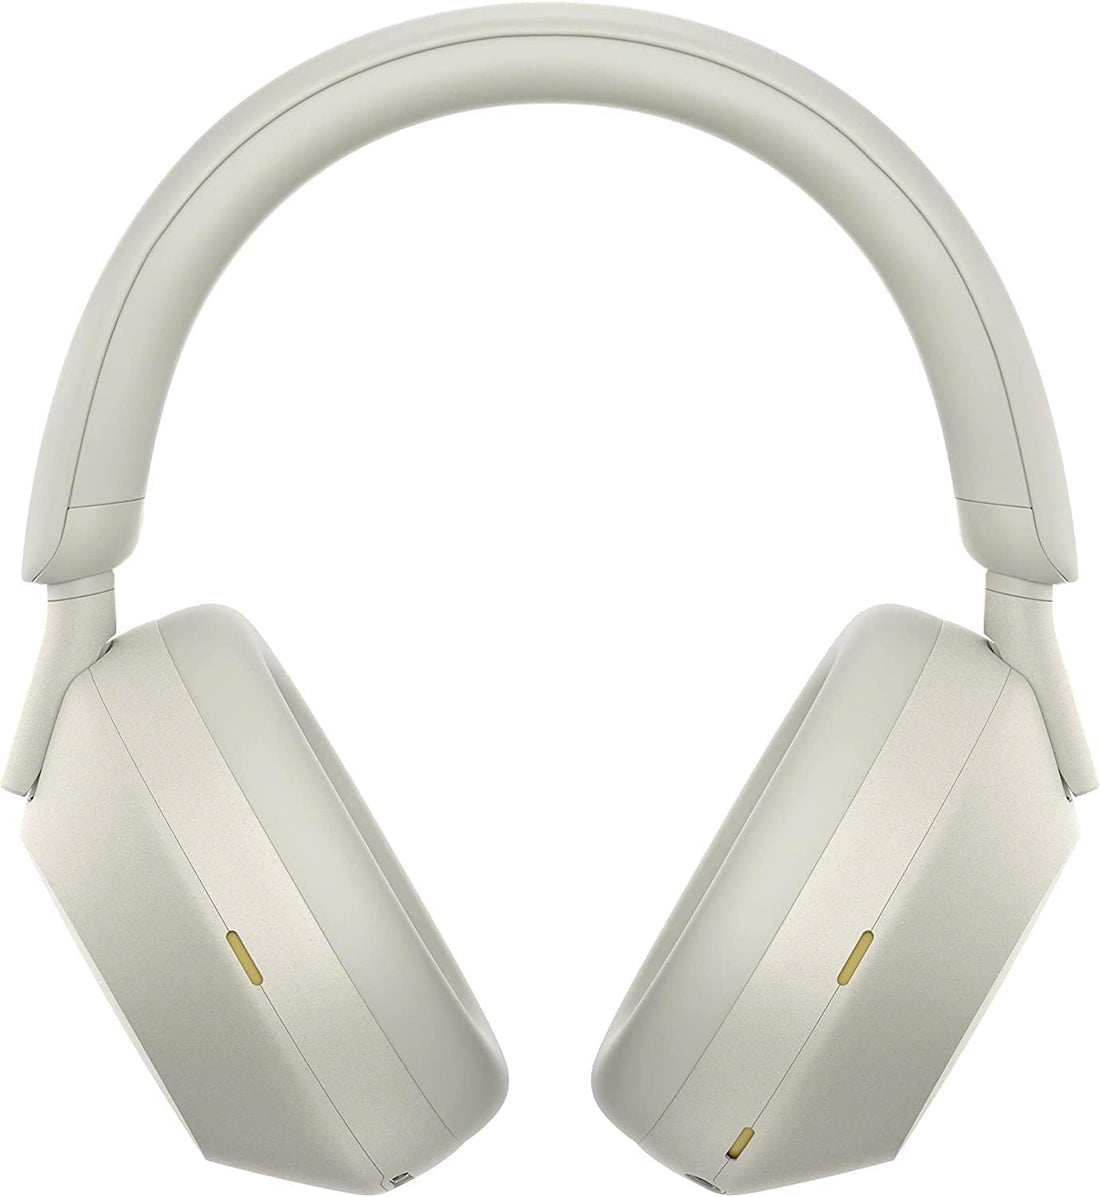 Sony WH1000XM5 Wireless Noise-Canceling Over-the-Ear Headphones - Silver (Refurbished)